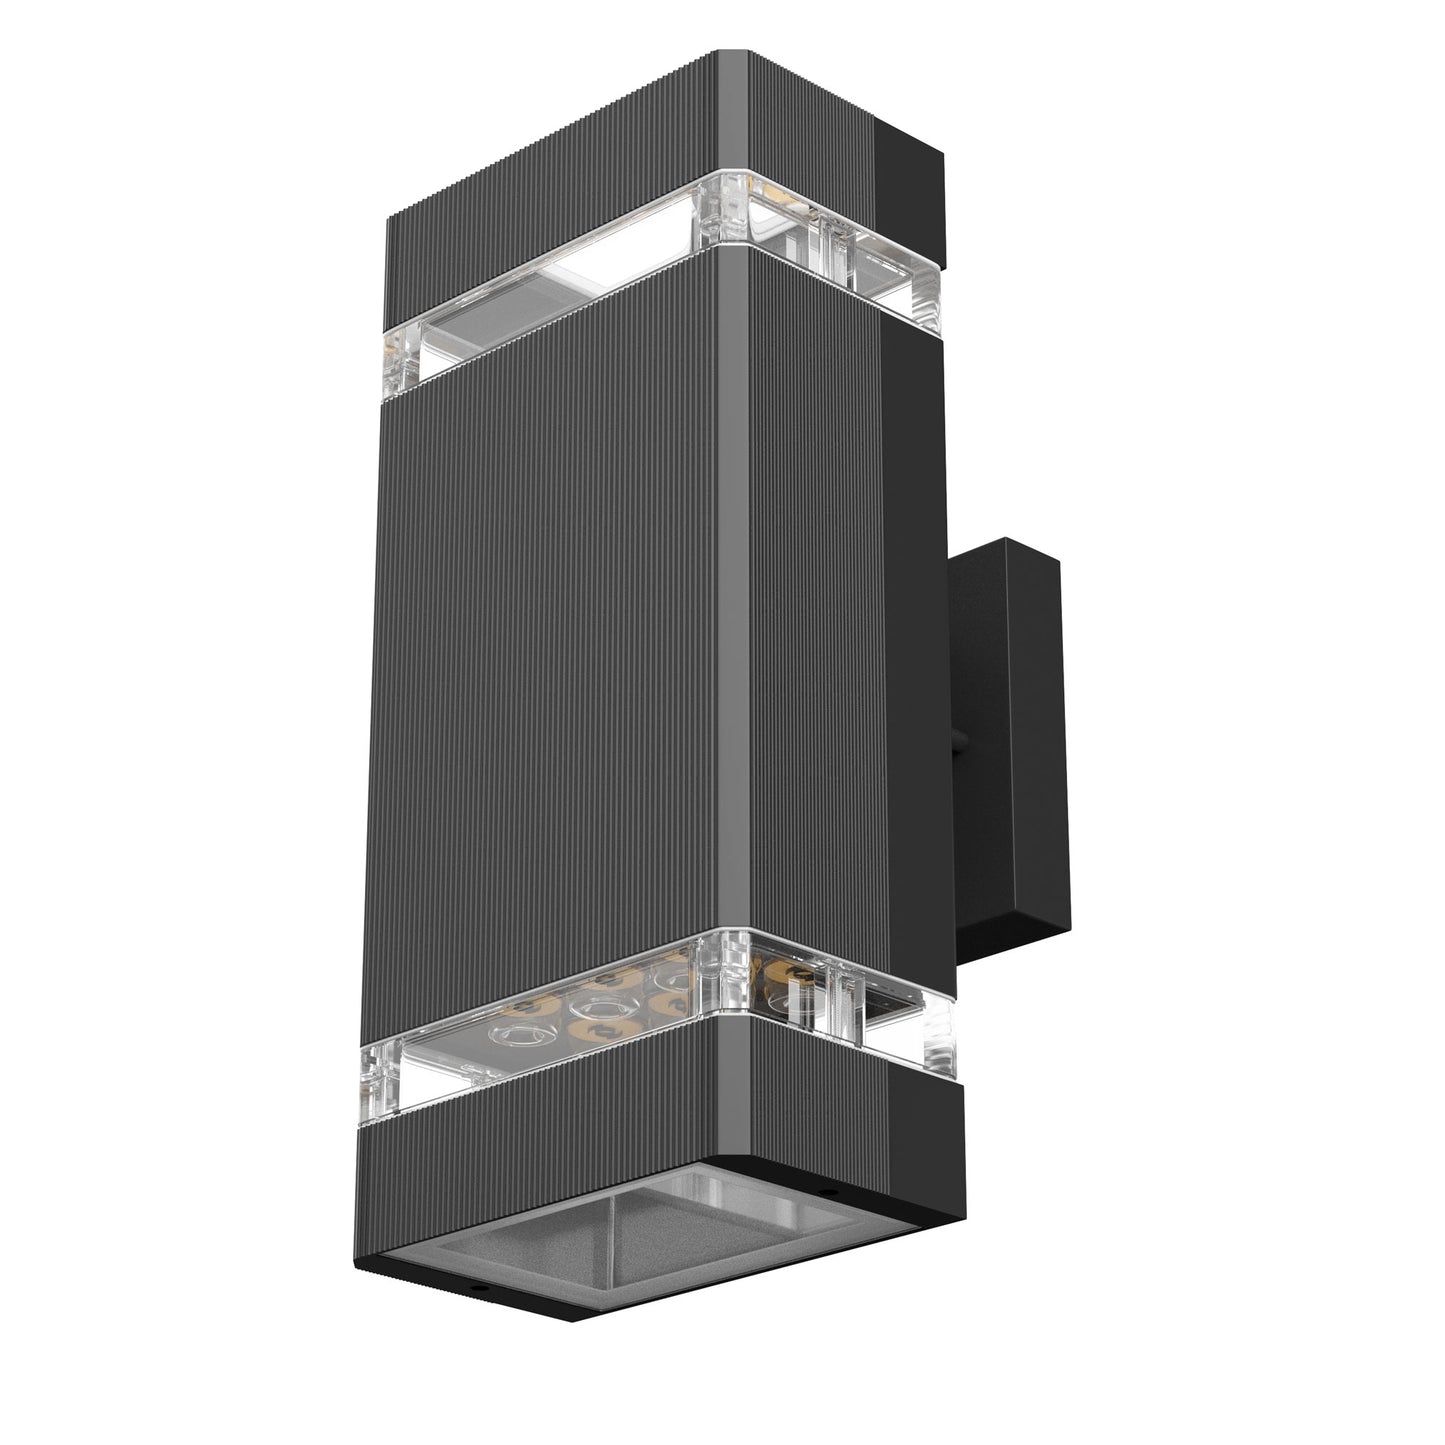 LED Up & Down Wall Lights Outdoor, Square, 2x6W, AC100- 277V, Waterproof Wall Sconce in 2 Lights, ETL-Listed, 80-90 Lumens/W